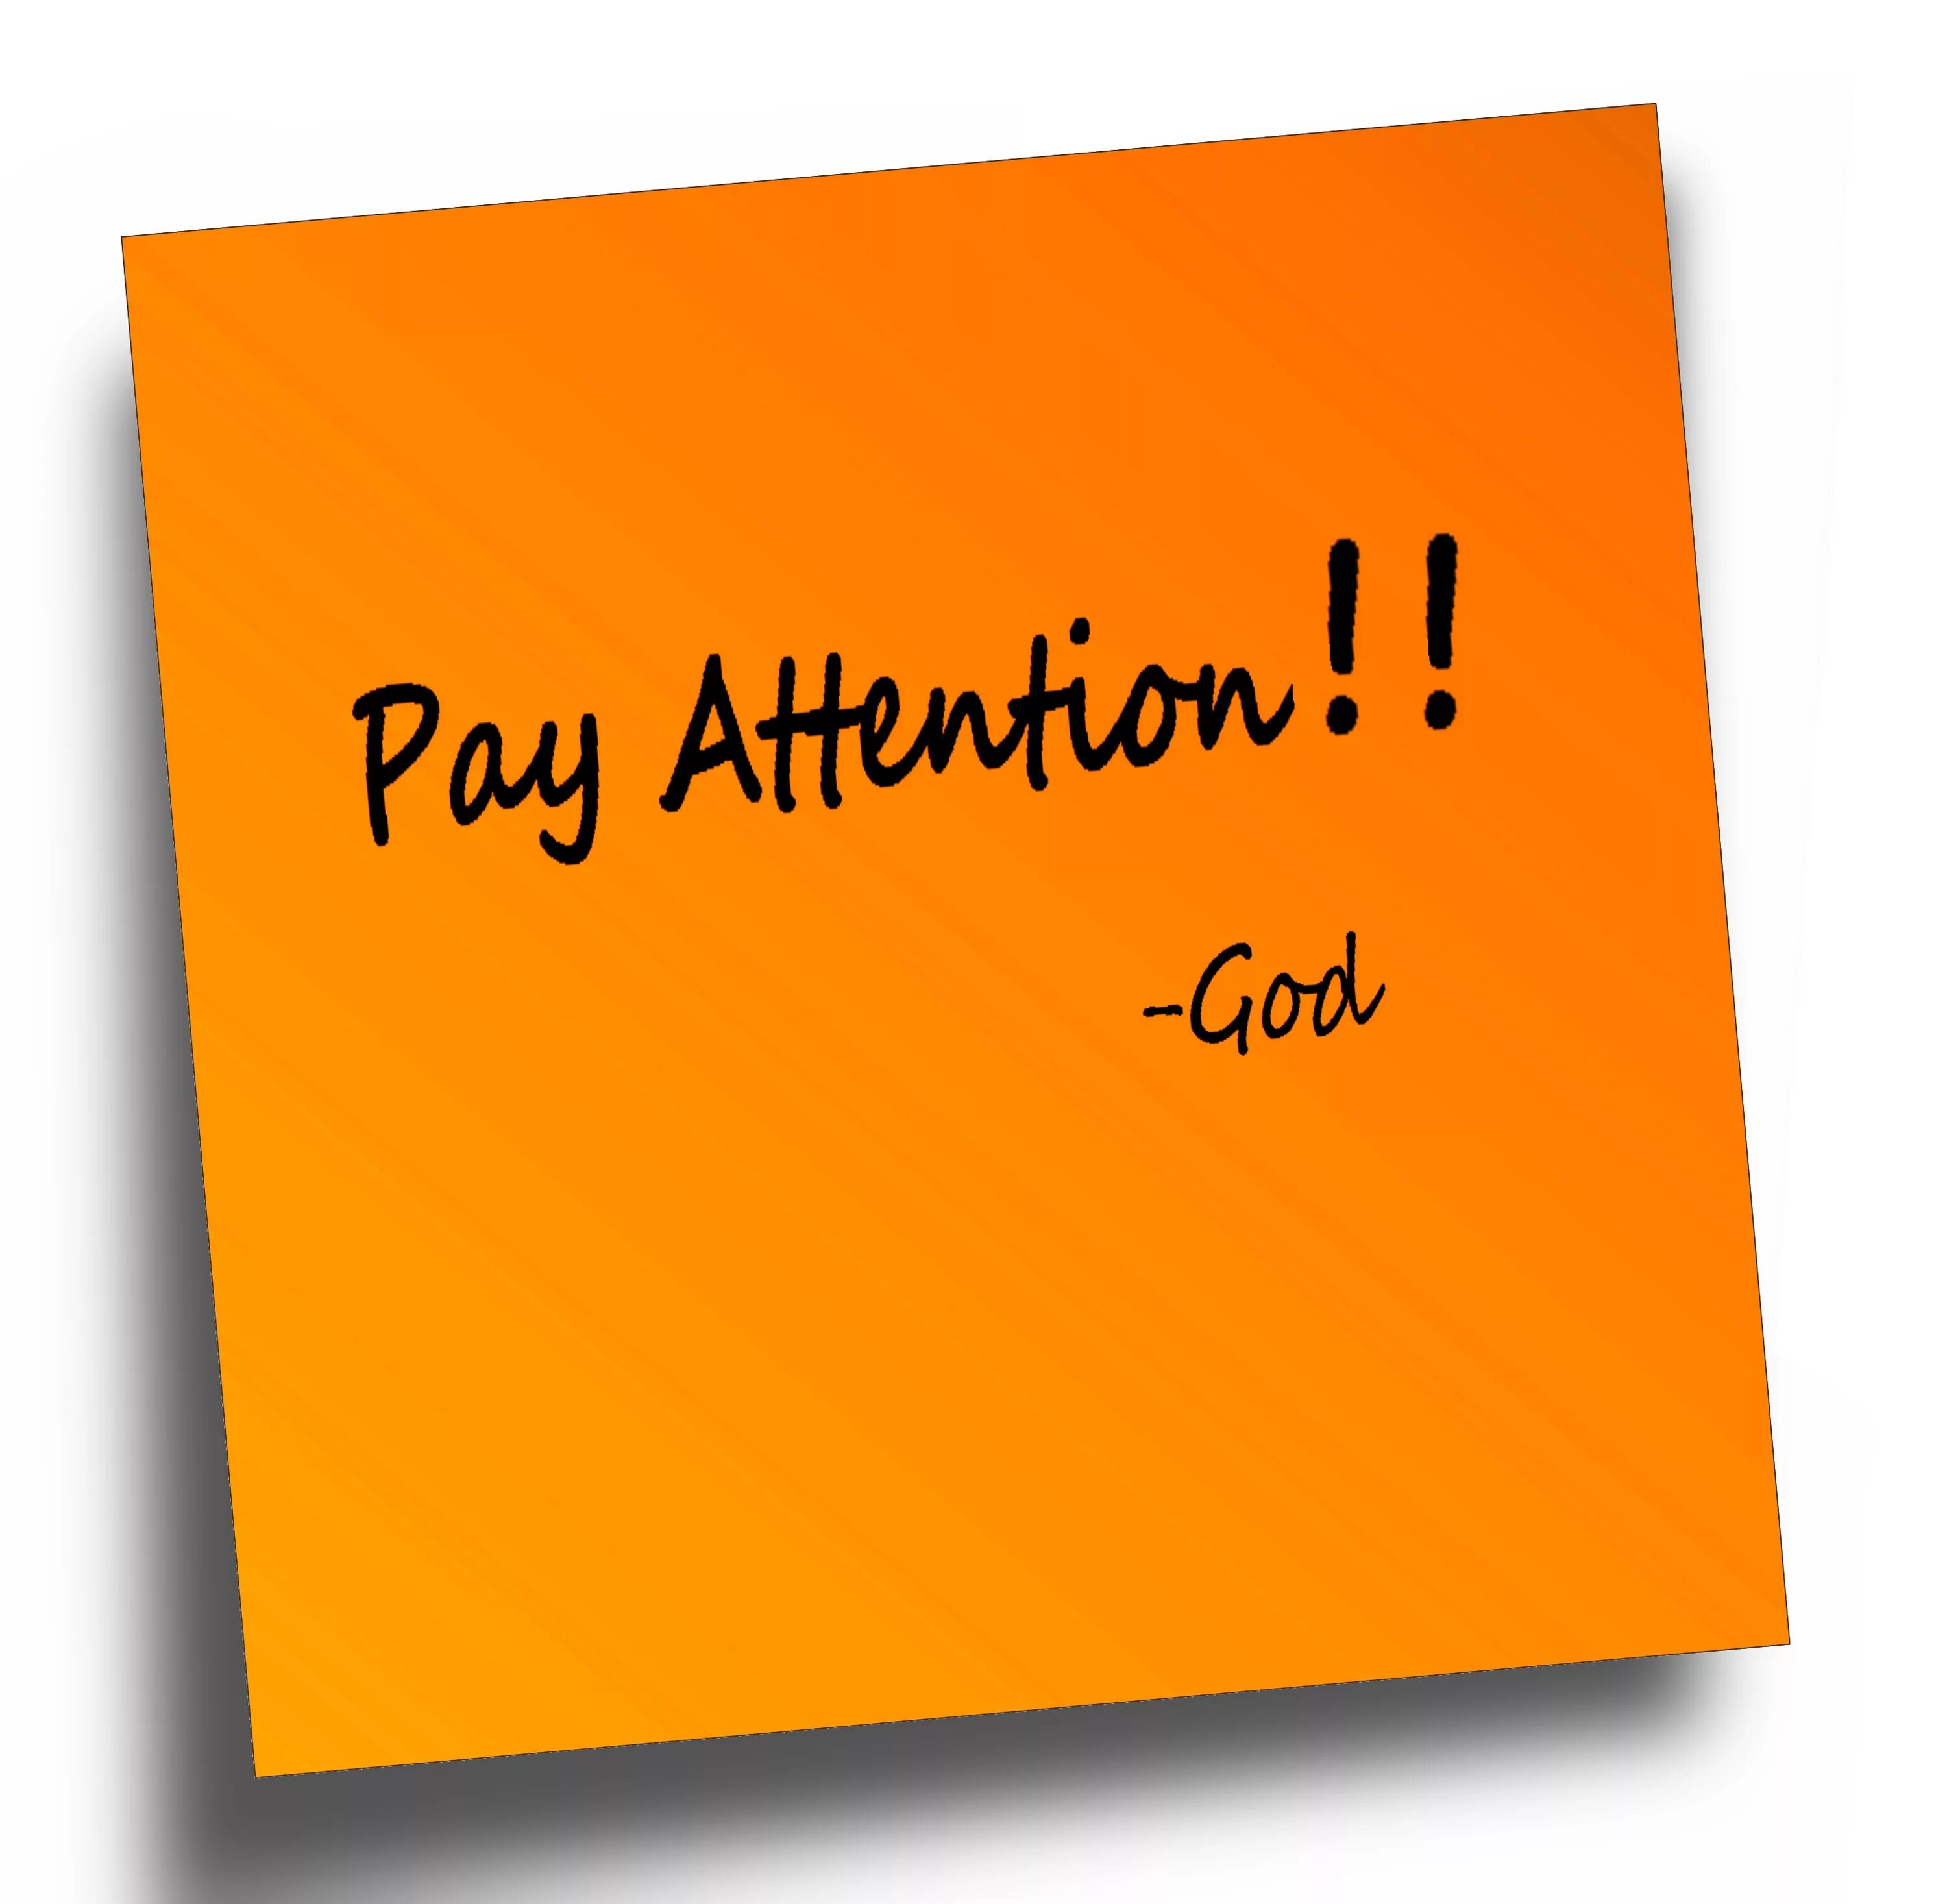 Pay attention. Pay attention картинка. To pay attention to. Paid attention. Come to attention